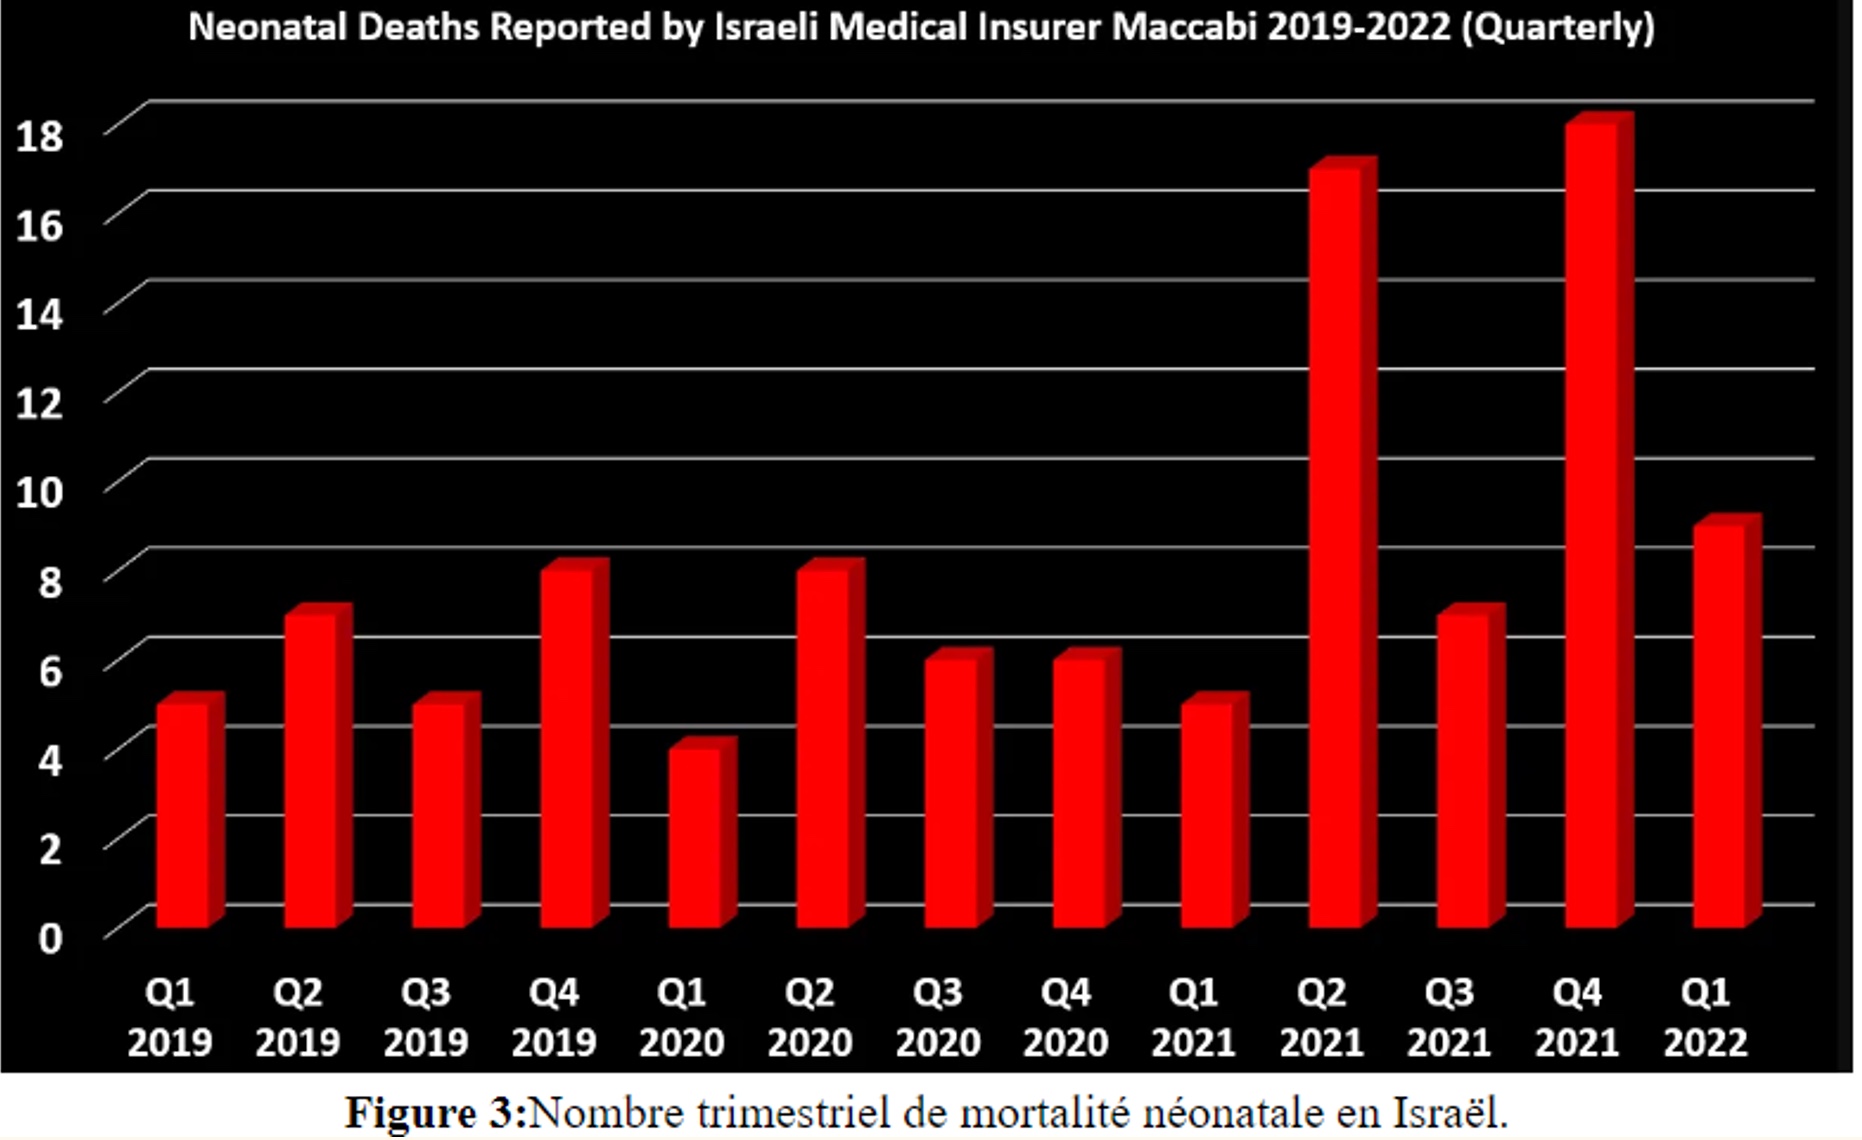 Neonatal Deaths Reported by Israeli Medical Insurer Maccabi 2019-2022 (Quaterly)